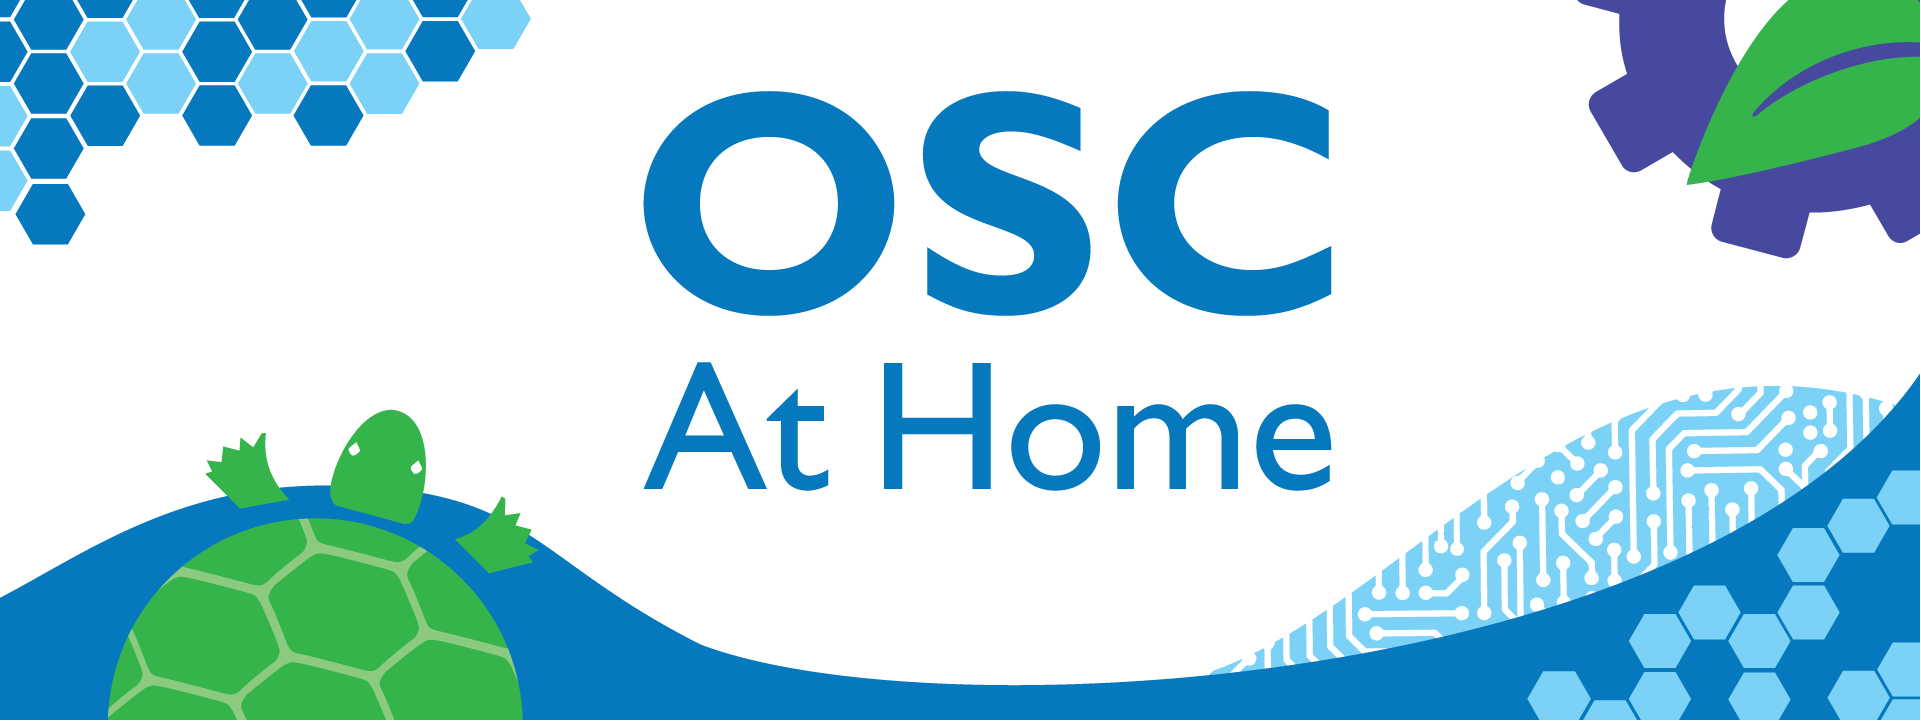 OSC At Home - illustration of turtle and hexagons